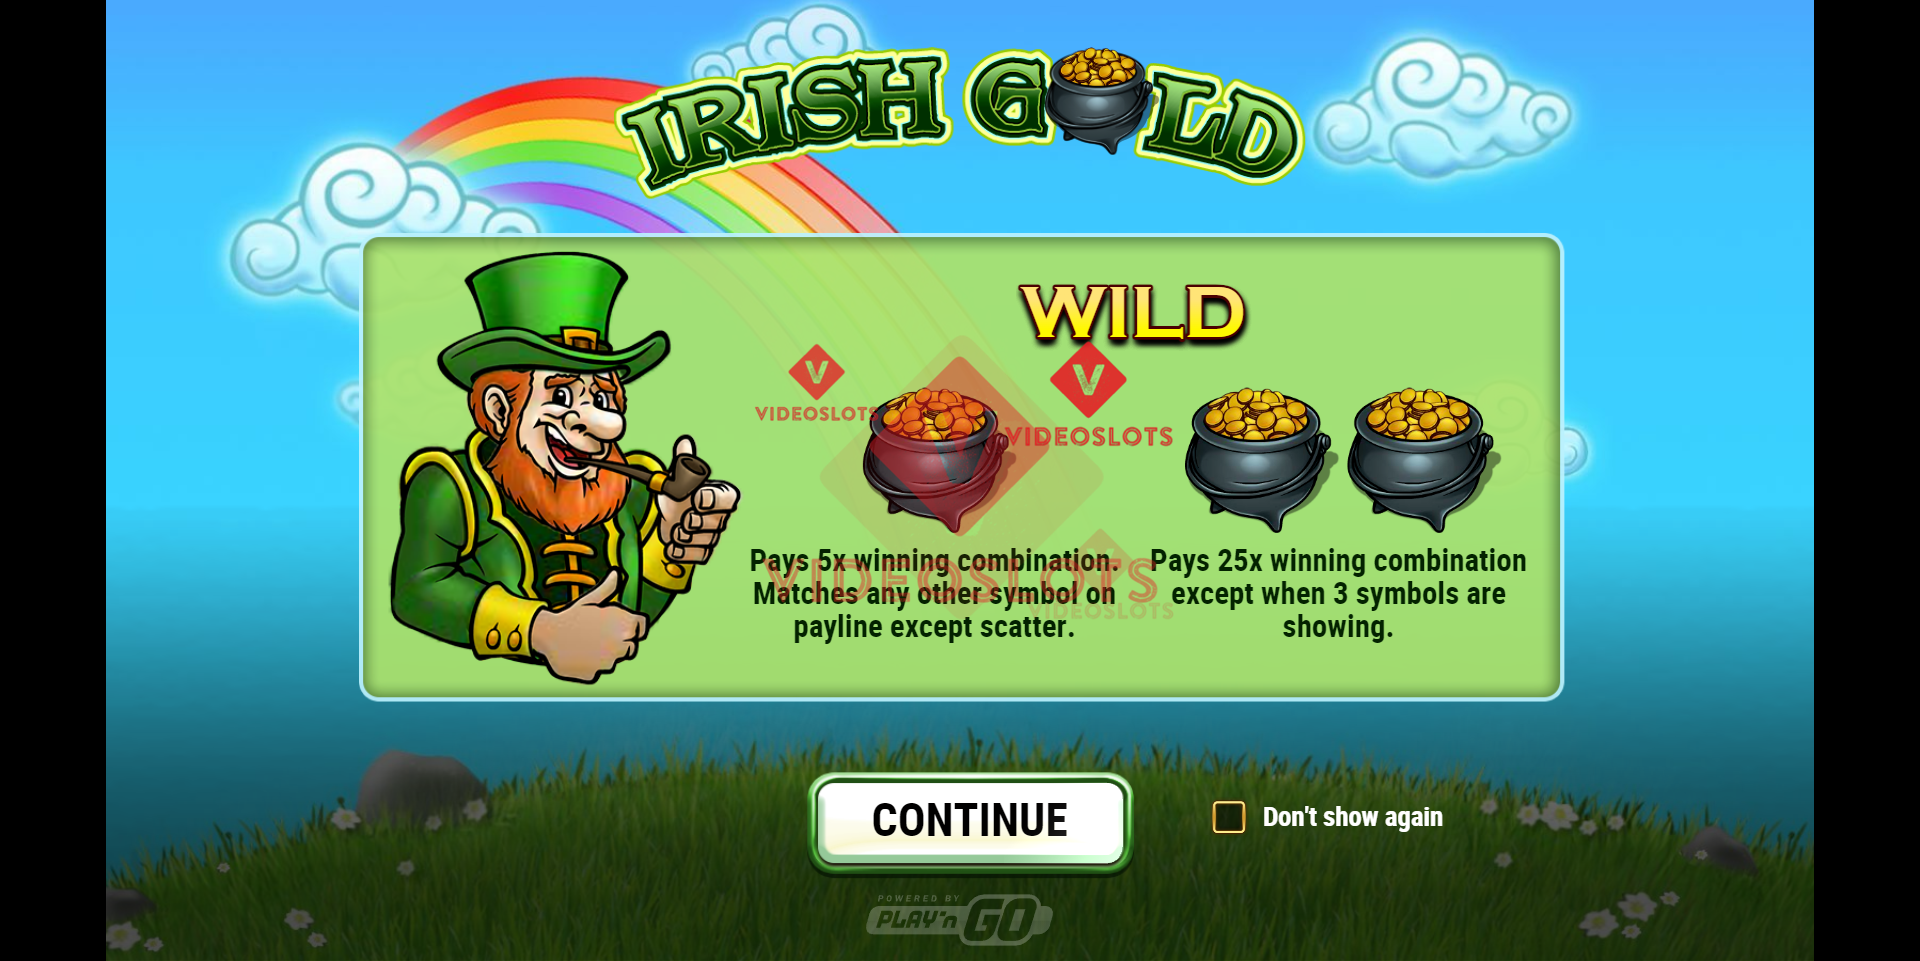 Game Intro for Irish Gold slot from Play'n Go